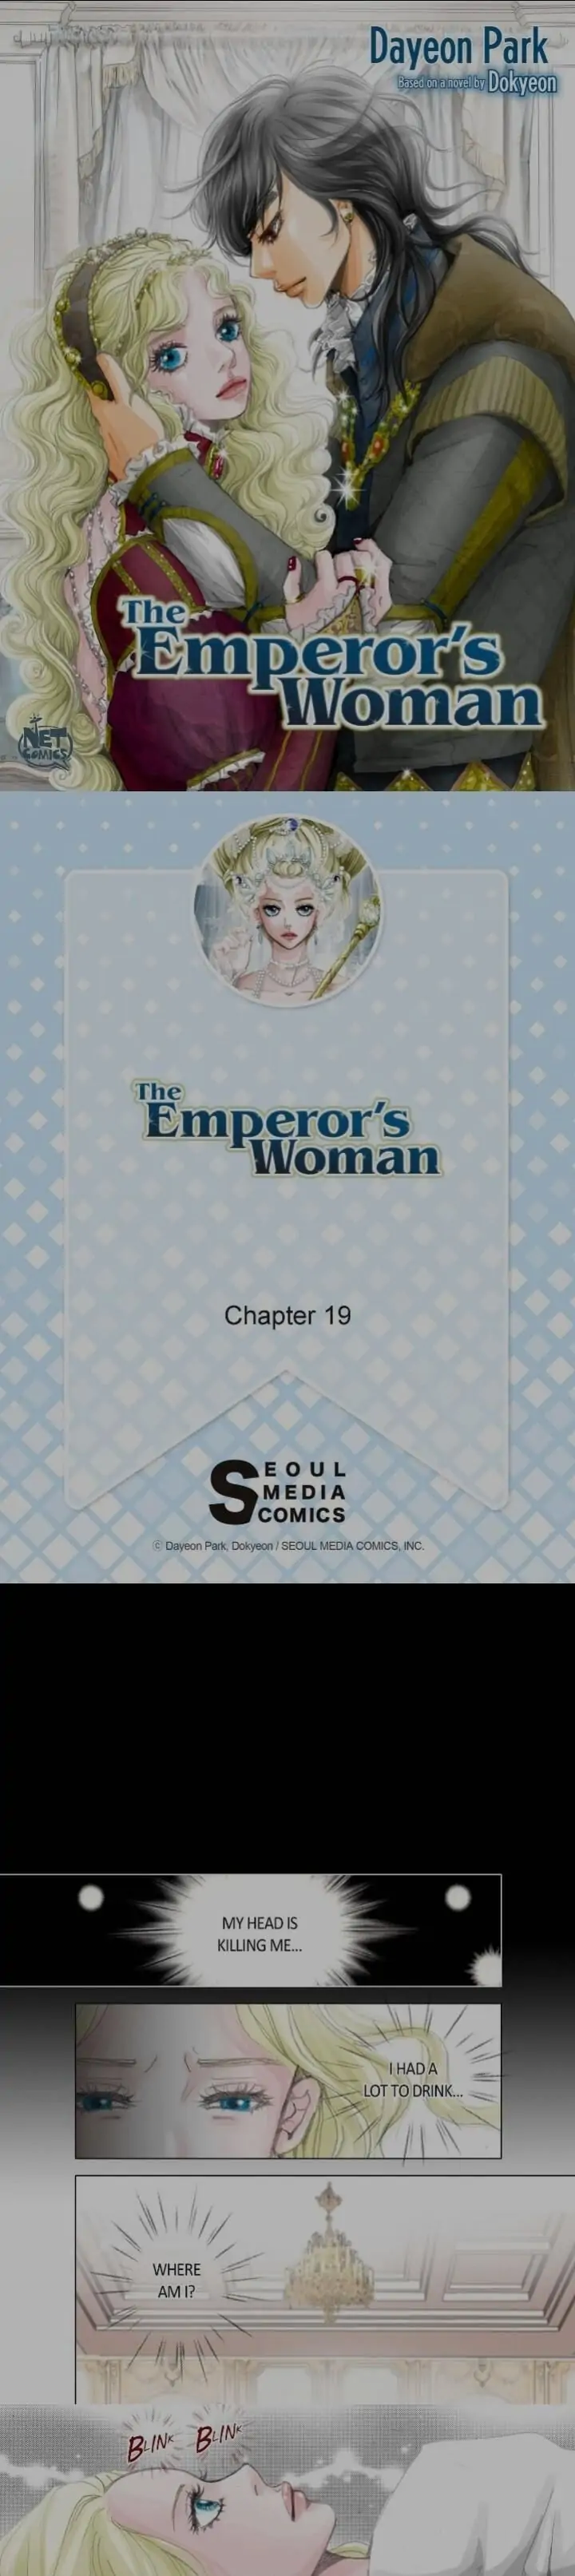 The Emperor’s Woman chapter 19